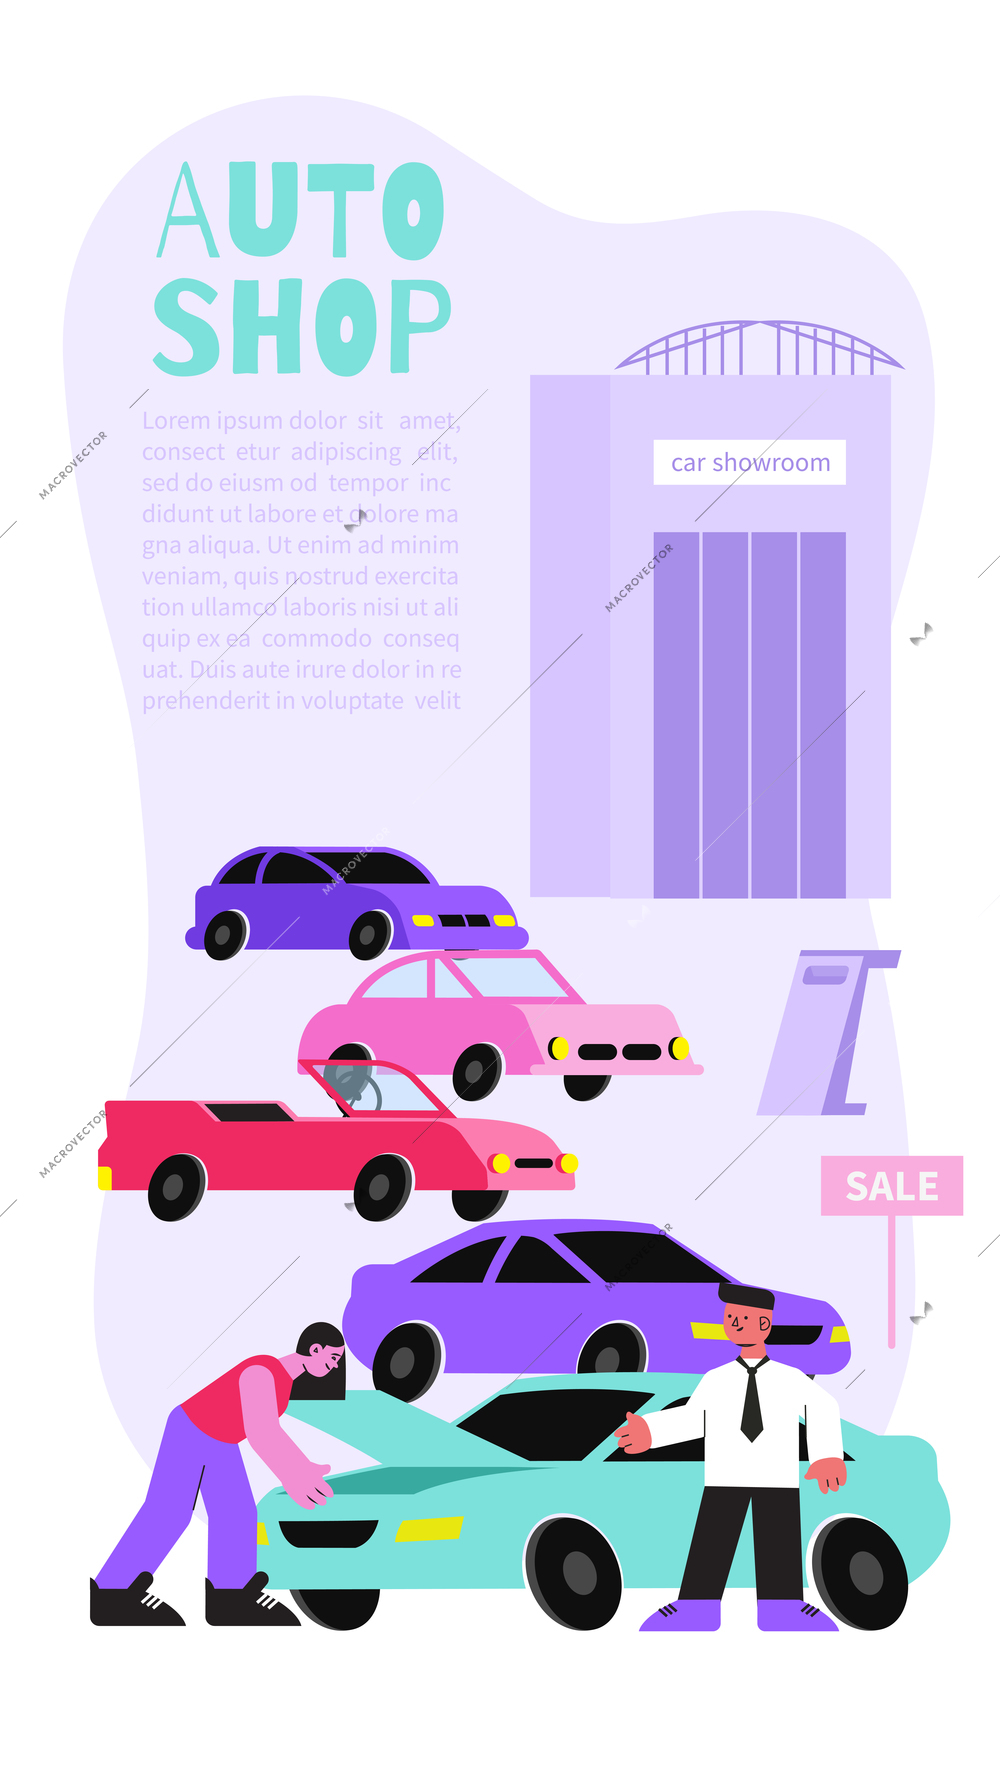 Auto shop vertical banner with editable text human characters and flat images of cars for sale vector illustration